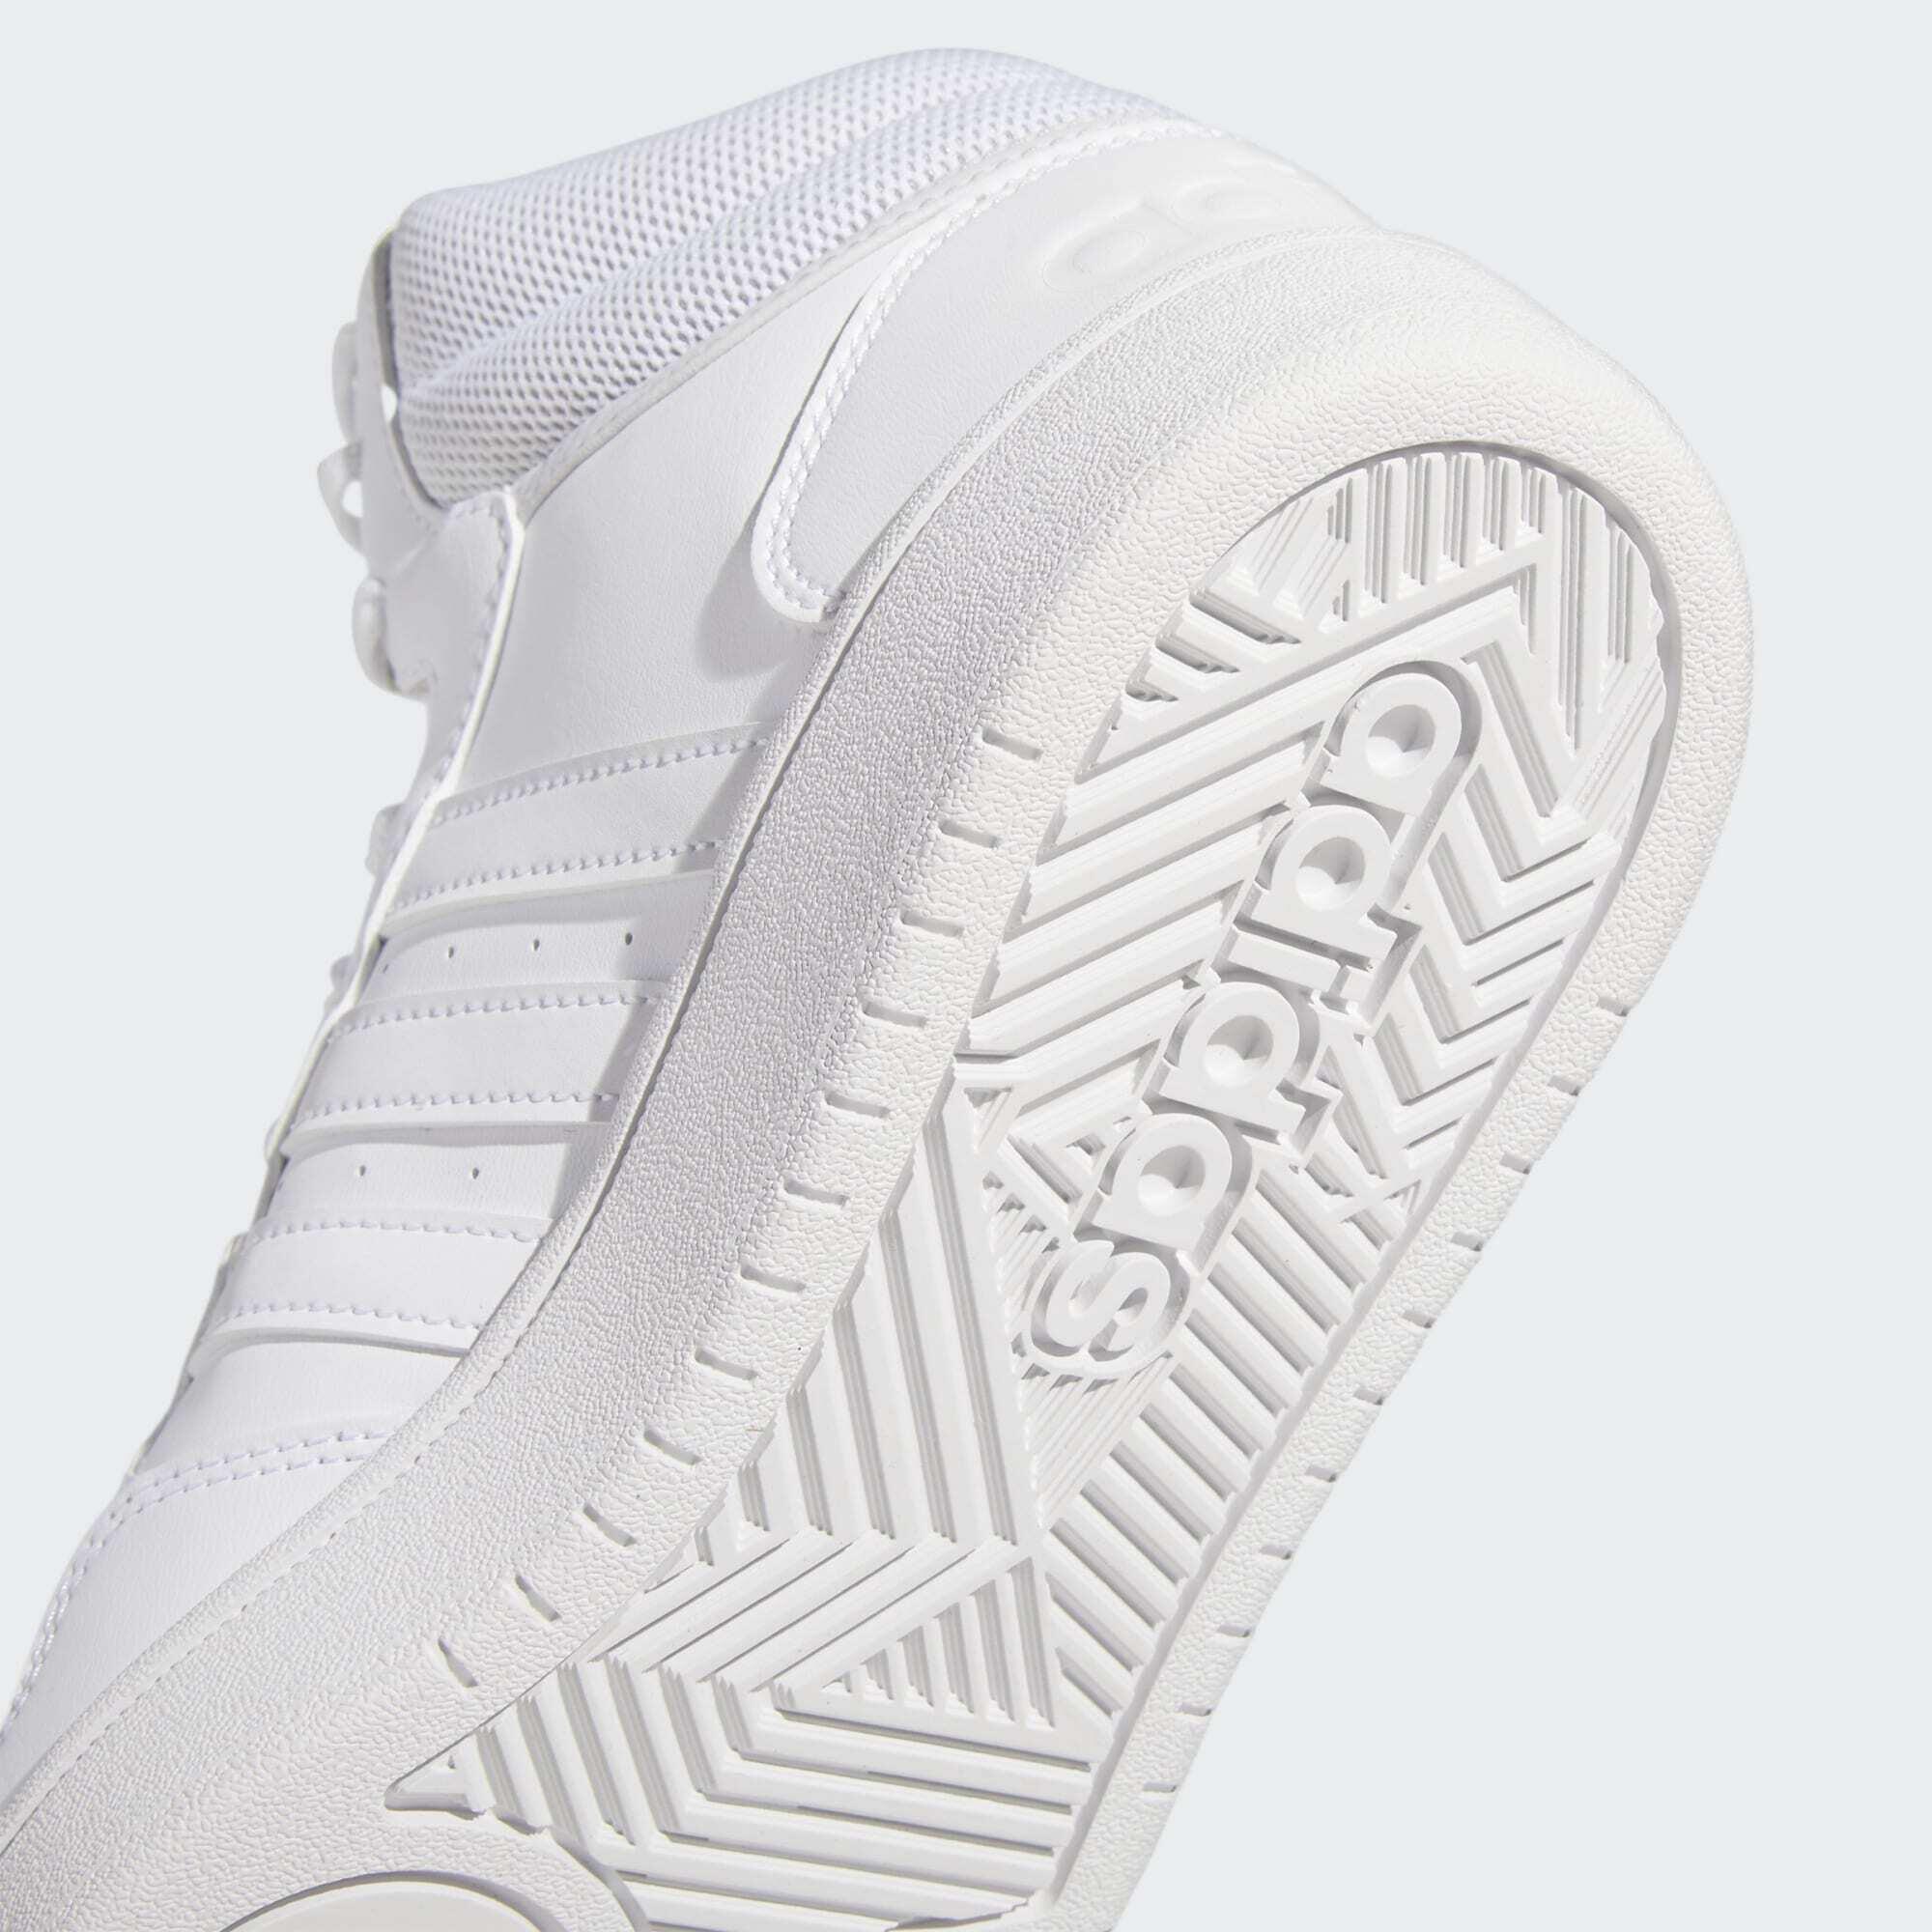 Hoops 3.0 Mid Classic Shoes 7/7